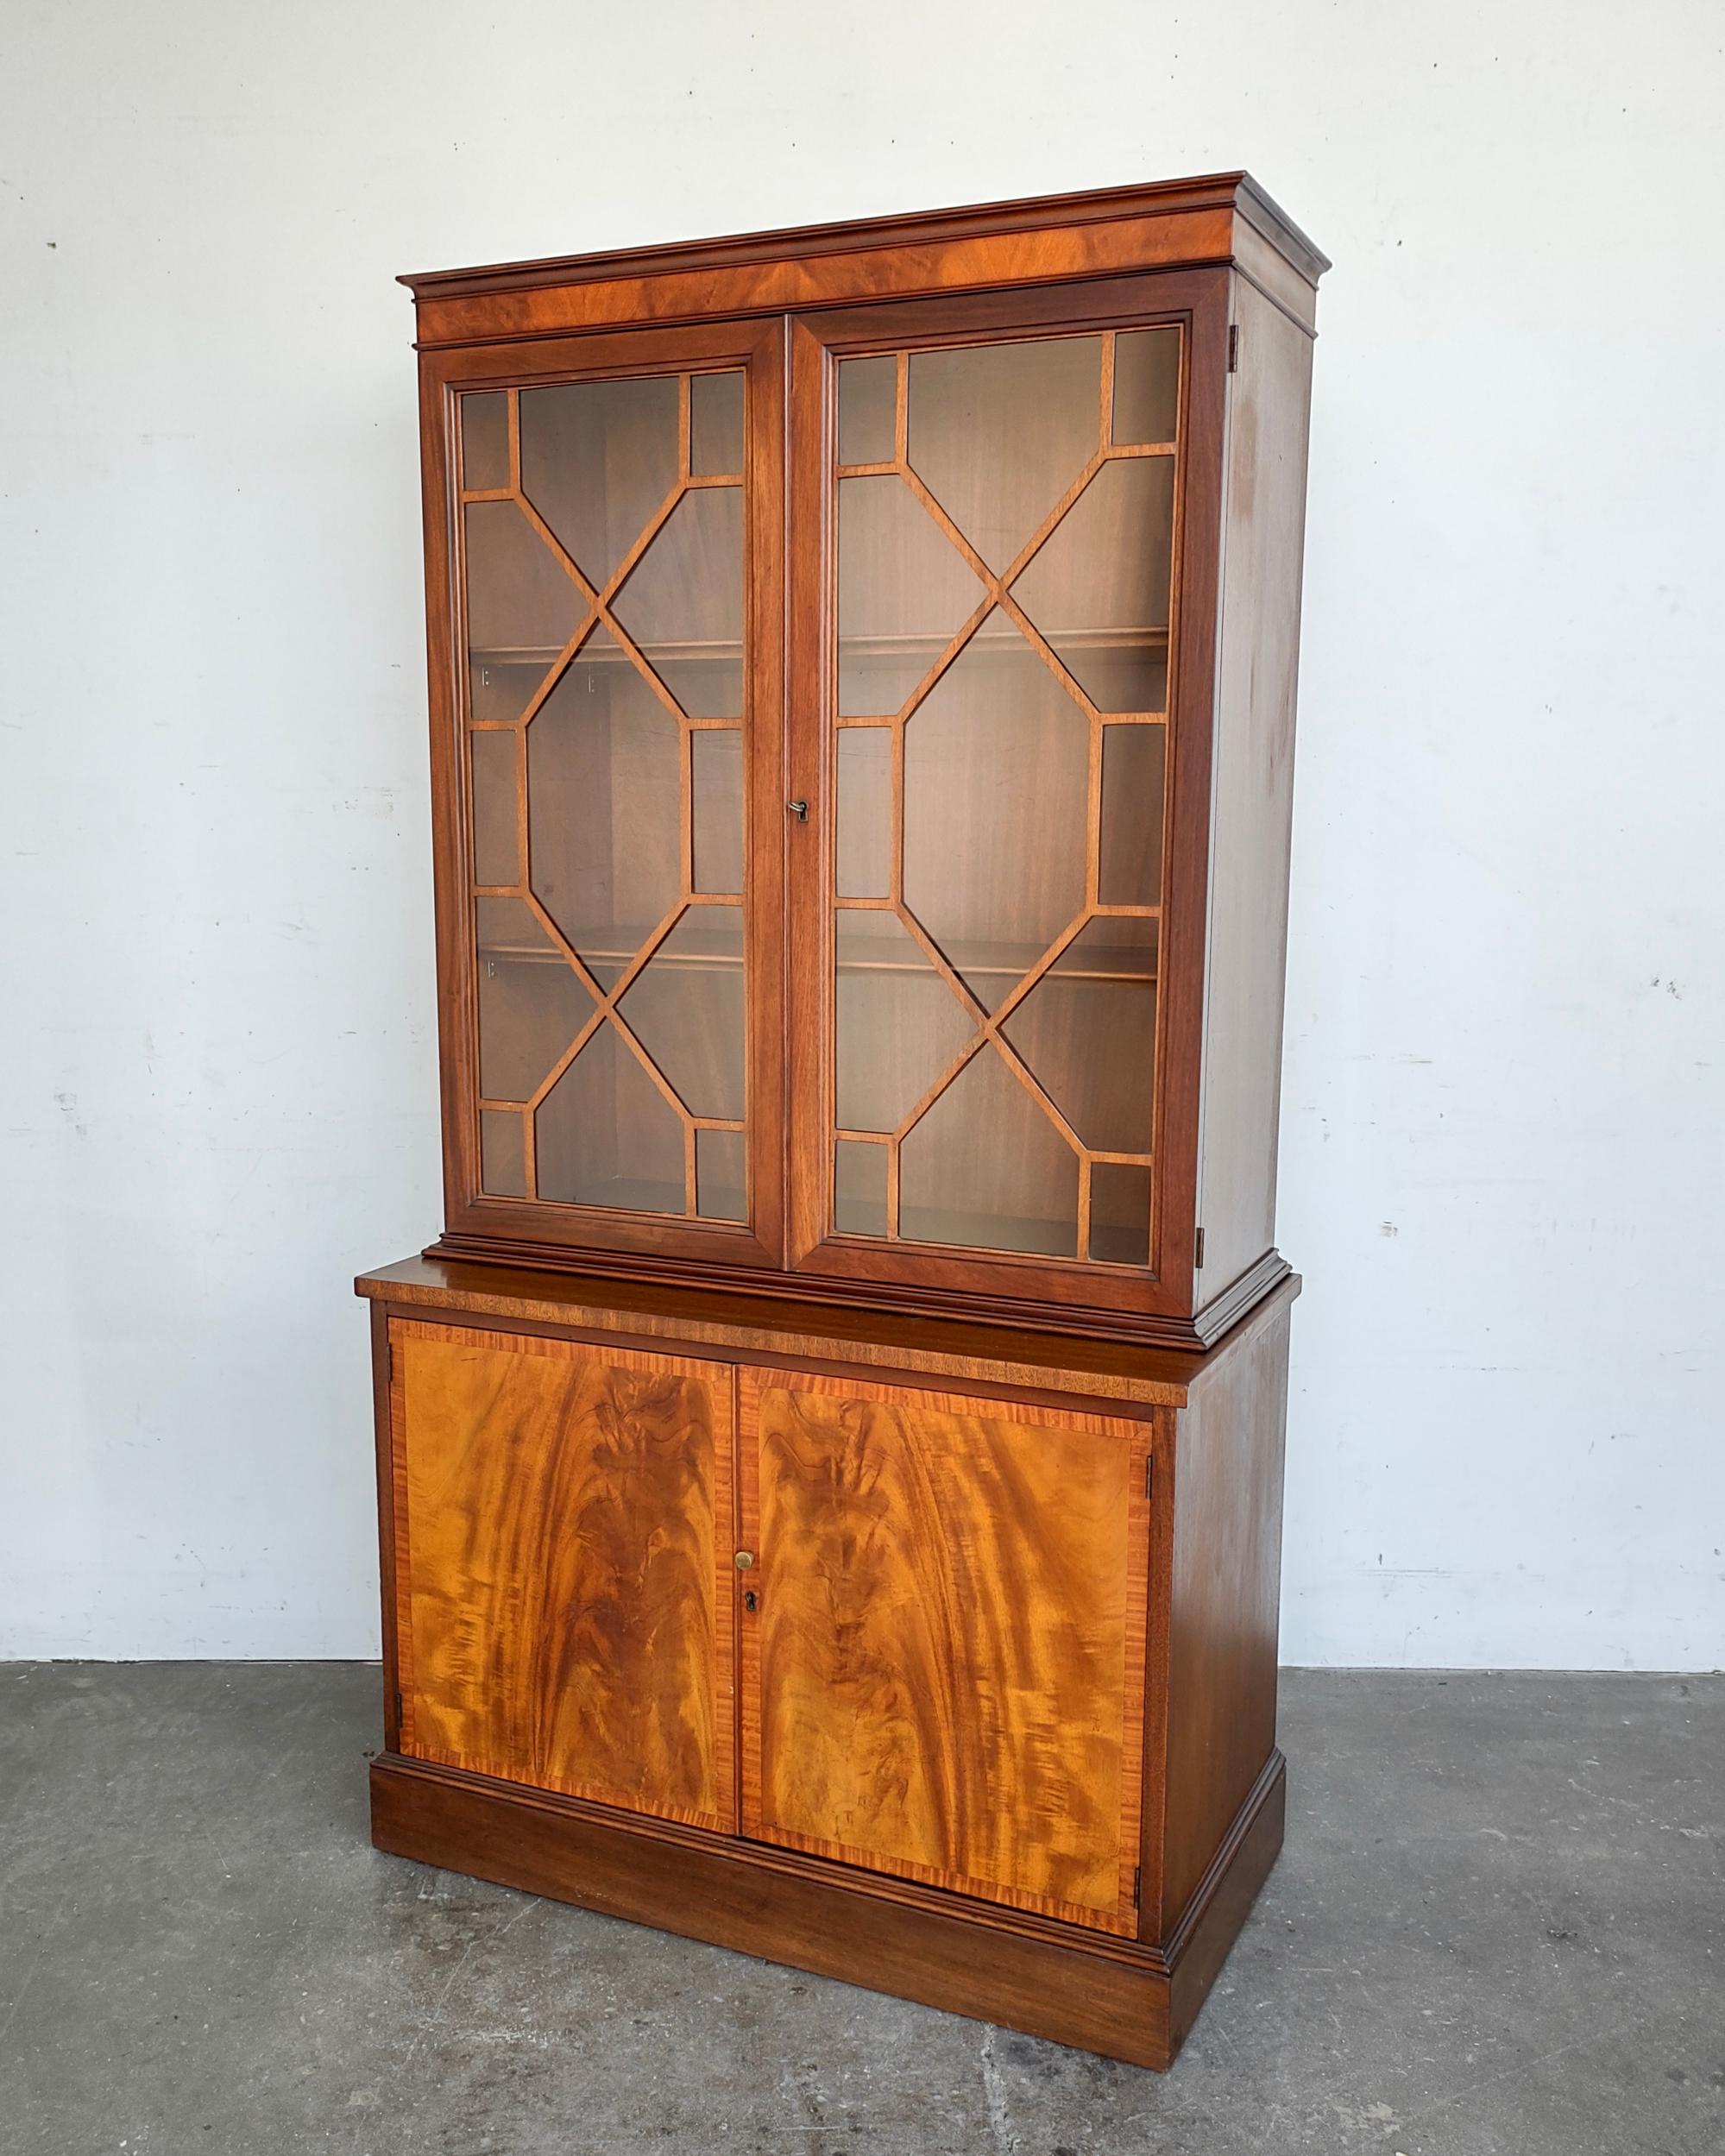 Flame mahogany Georgian style bookcase cabinet. Gorgeous wood grain covering entire body. Upper cabinet features glass doors with cutout wood pattern, inside had two removable shelves. Lower cabinet lock hardware missing, inside one removable shelf.